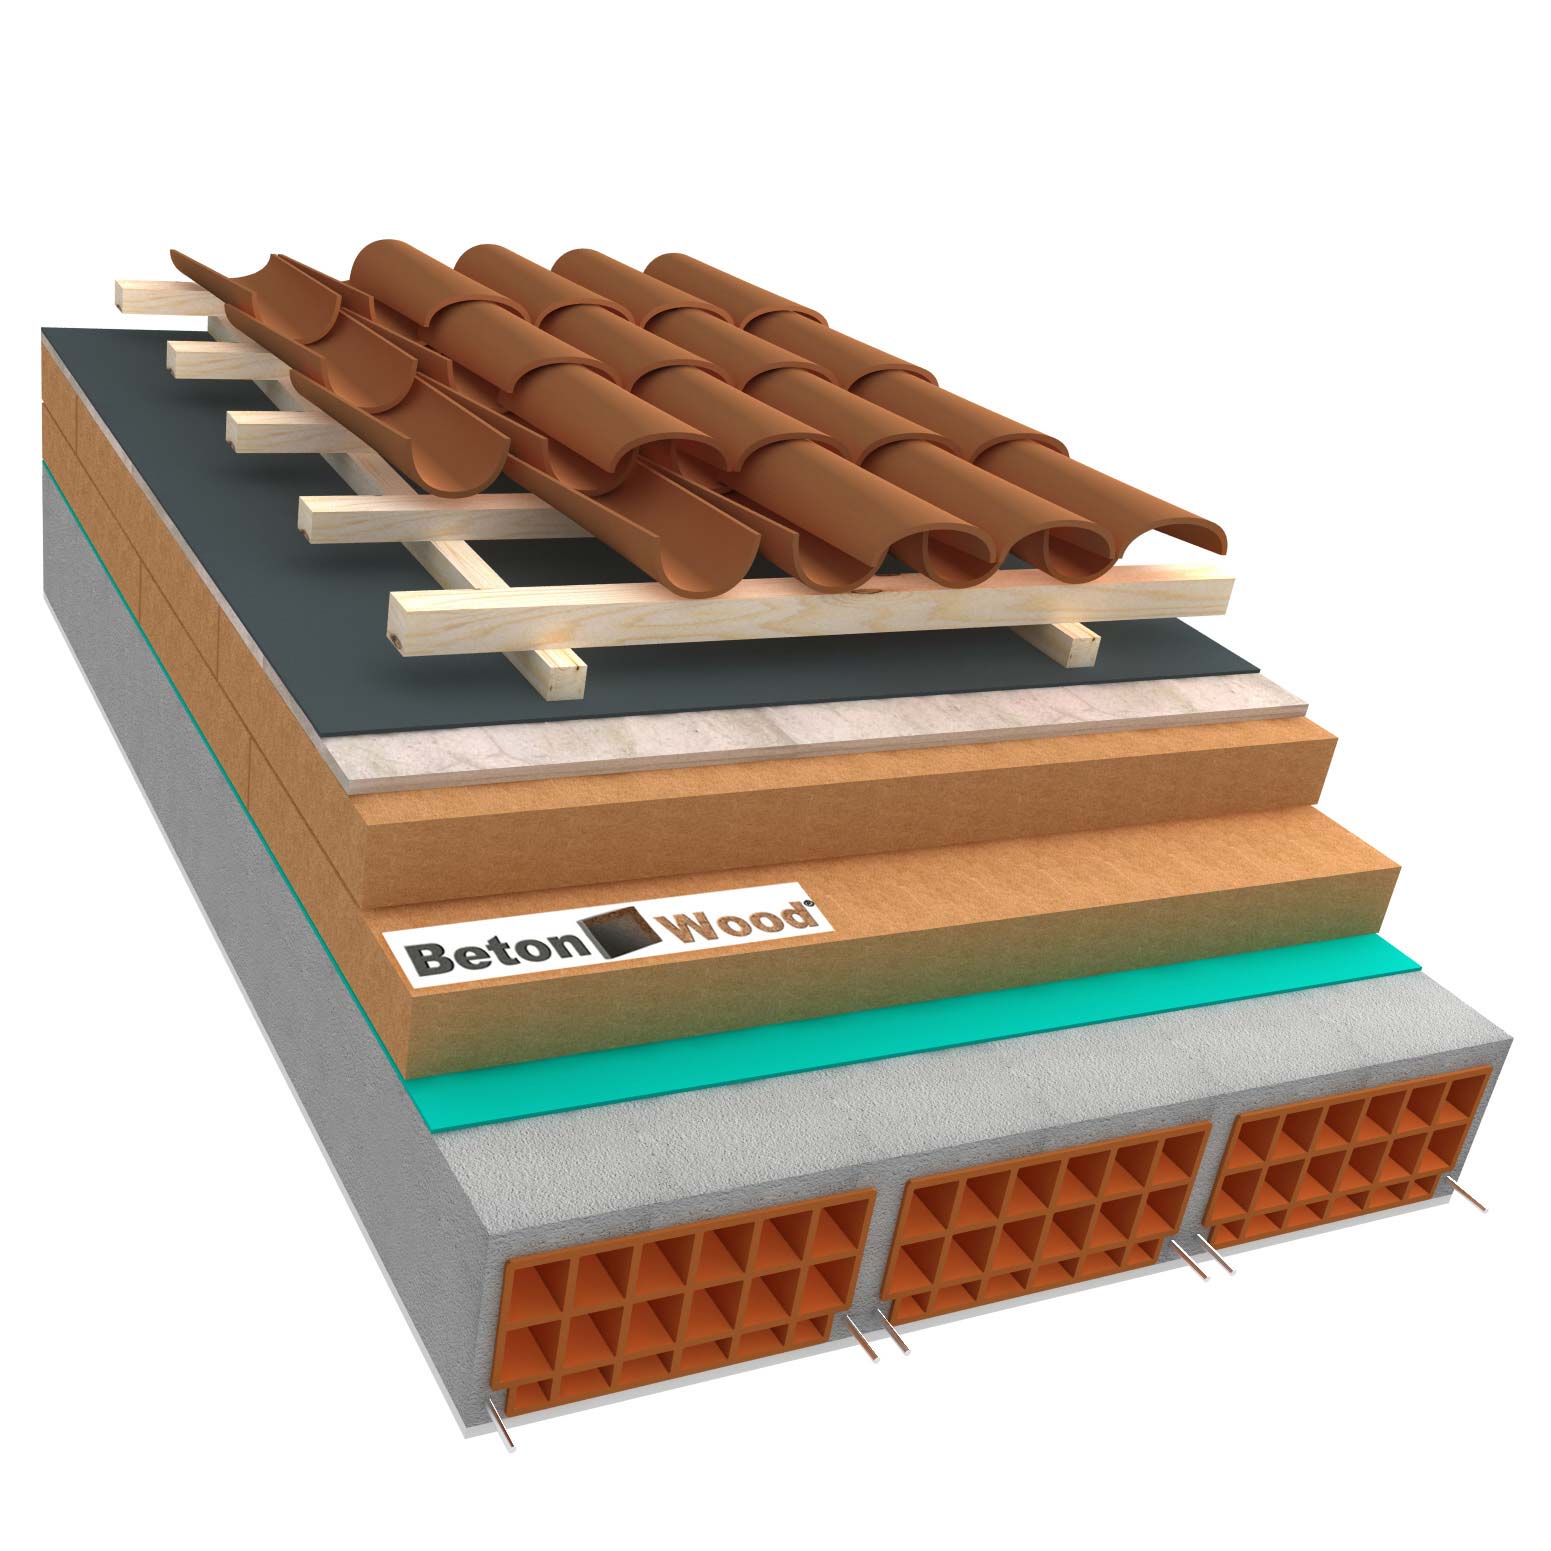 Ventilated roof with fiber wood Universal and cement bonded particle boards on concrete